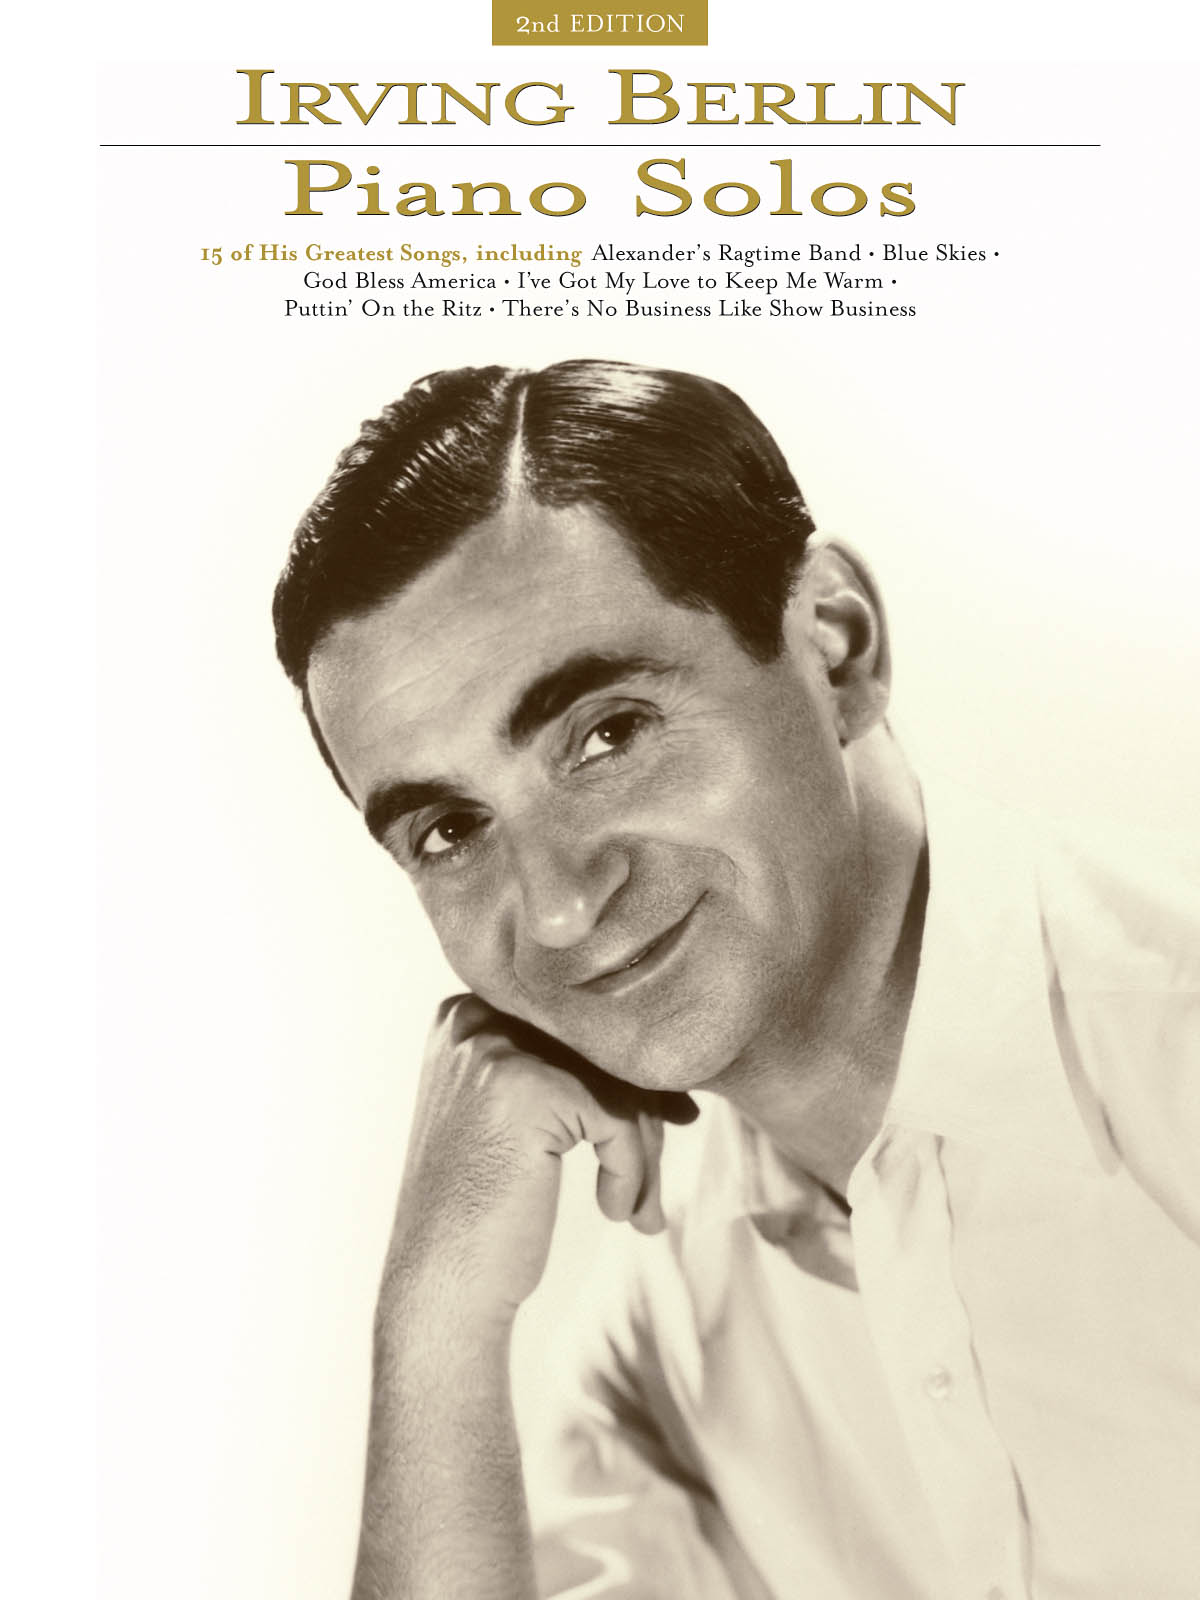 Irving Berlin Piano Solos – 2nd Edition